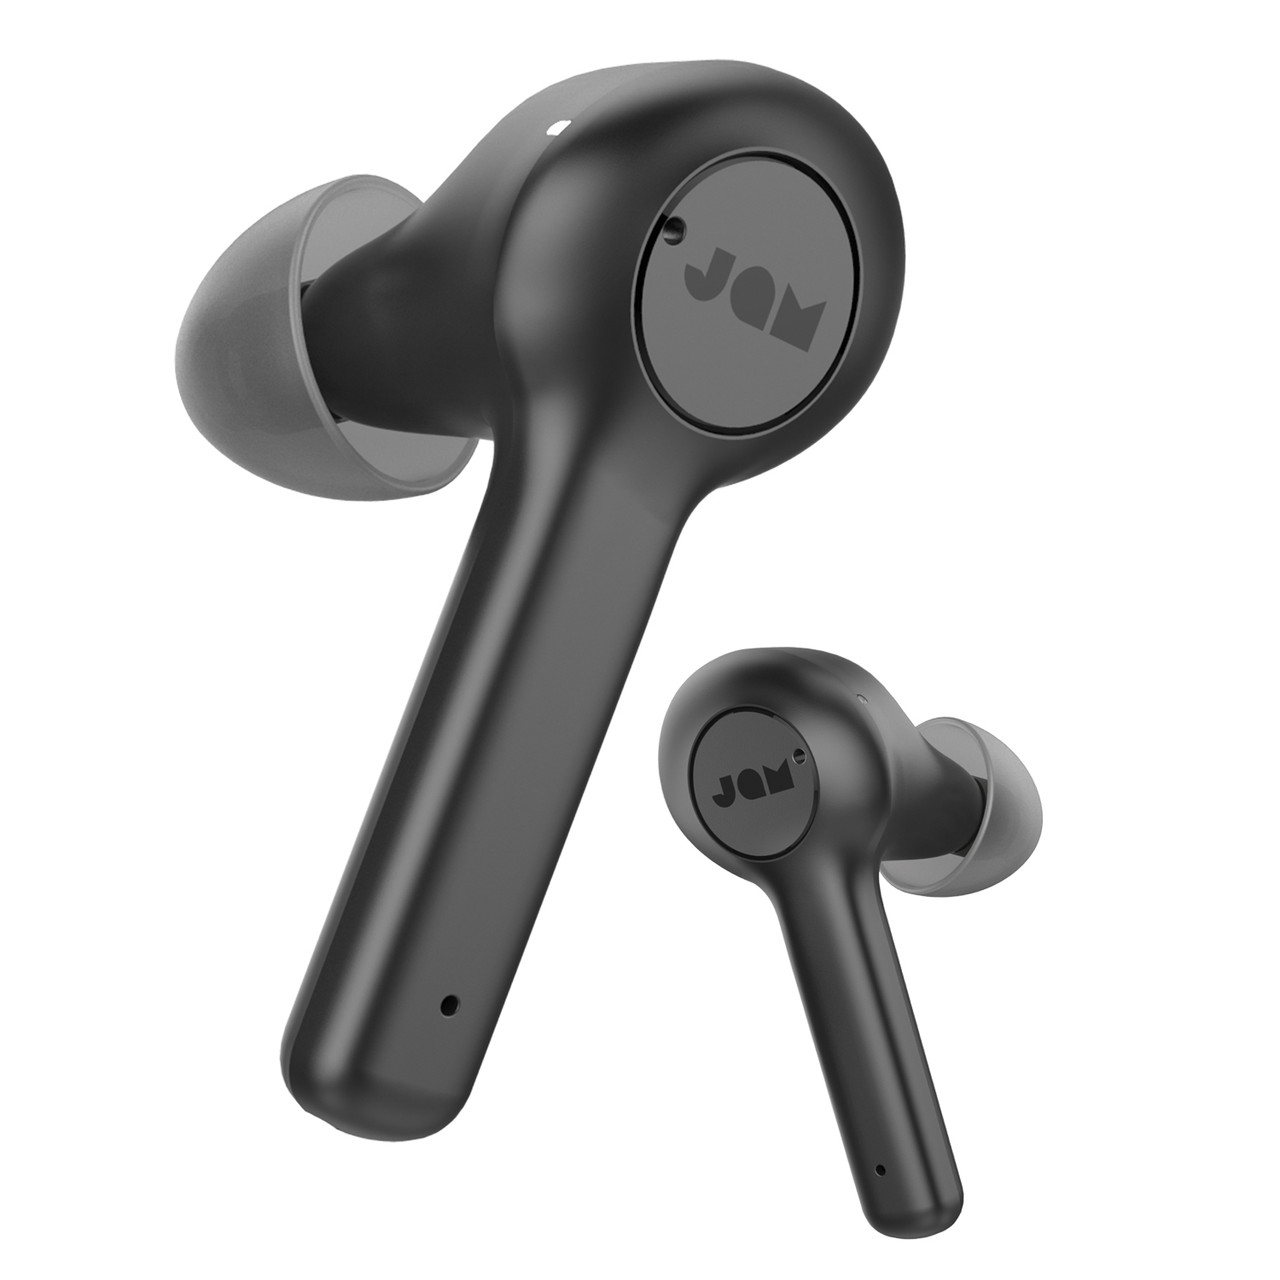 JAM True Wireless Active Noise Cancelling Earbuds